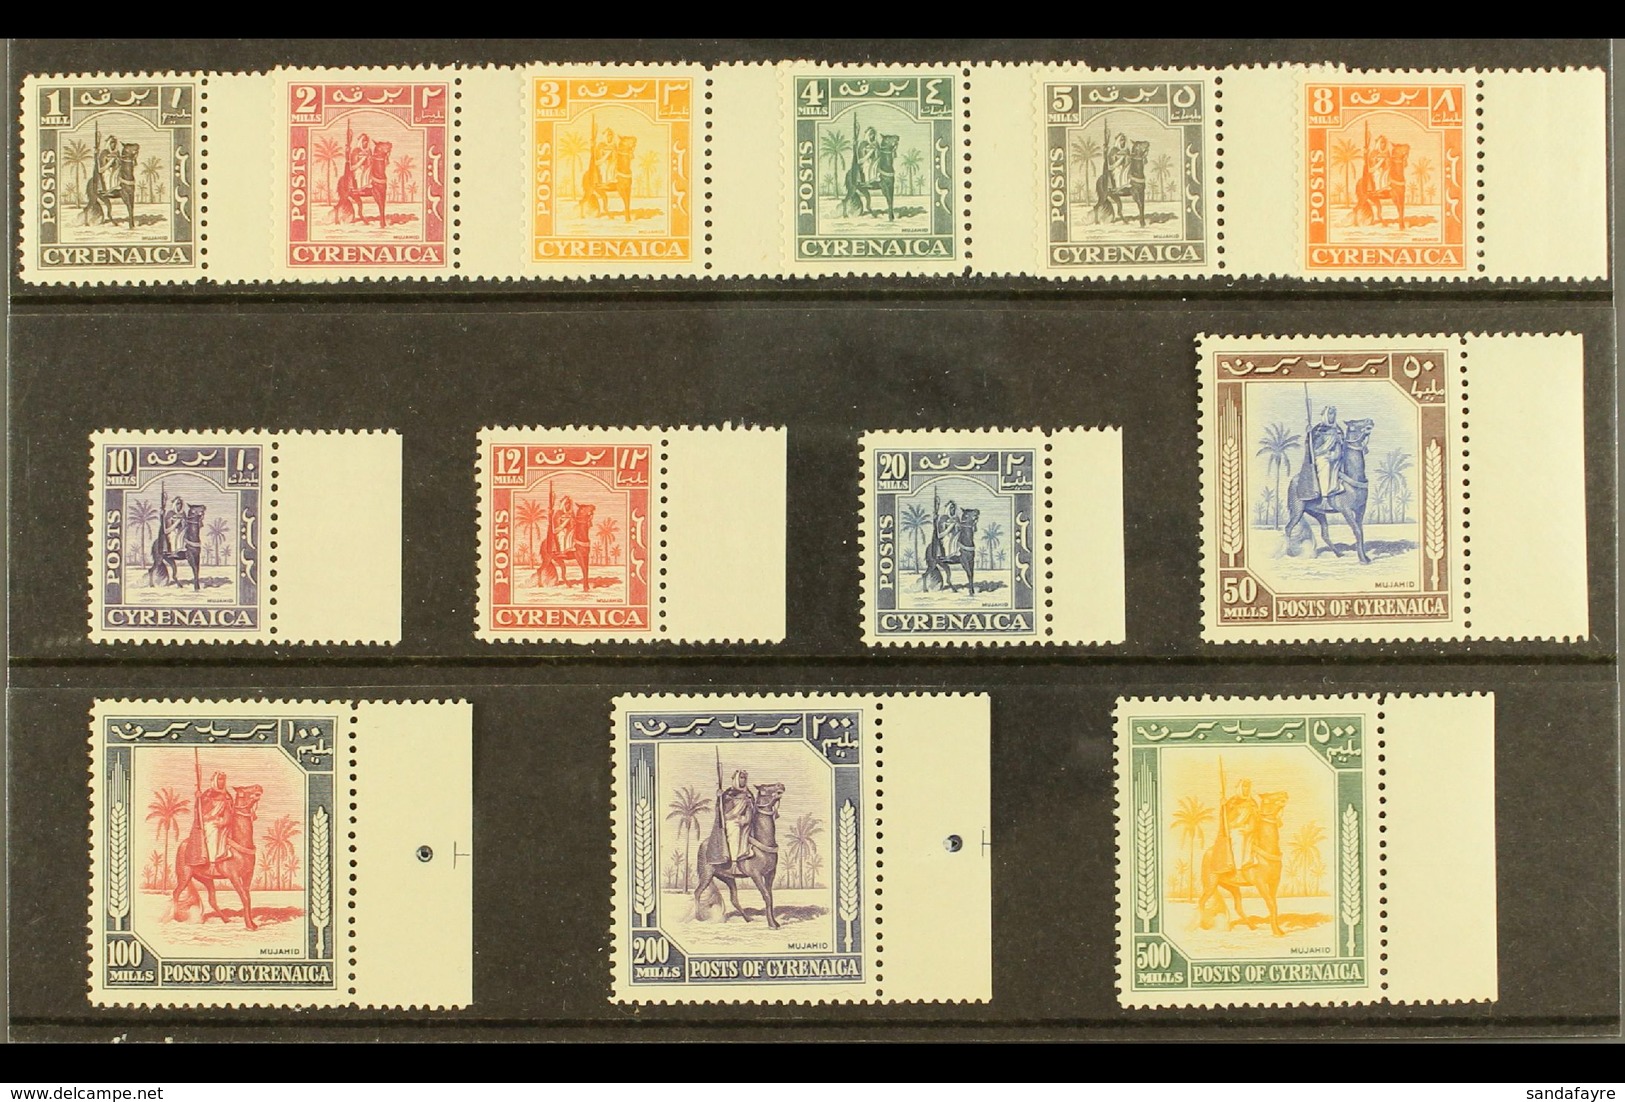 CYRENAICA 1950 "Mounted Warrior" Definitives Complete Set, SG 136/48, Very Fine Never Hinged Mint Matching Marginal Exam - Italiaans Oost-Afrika